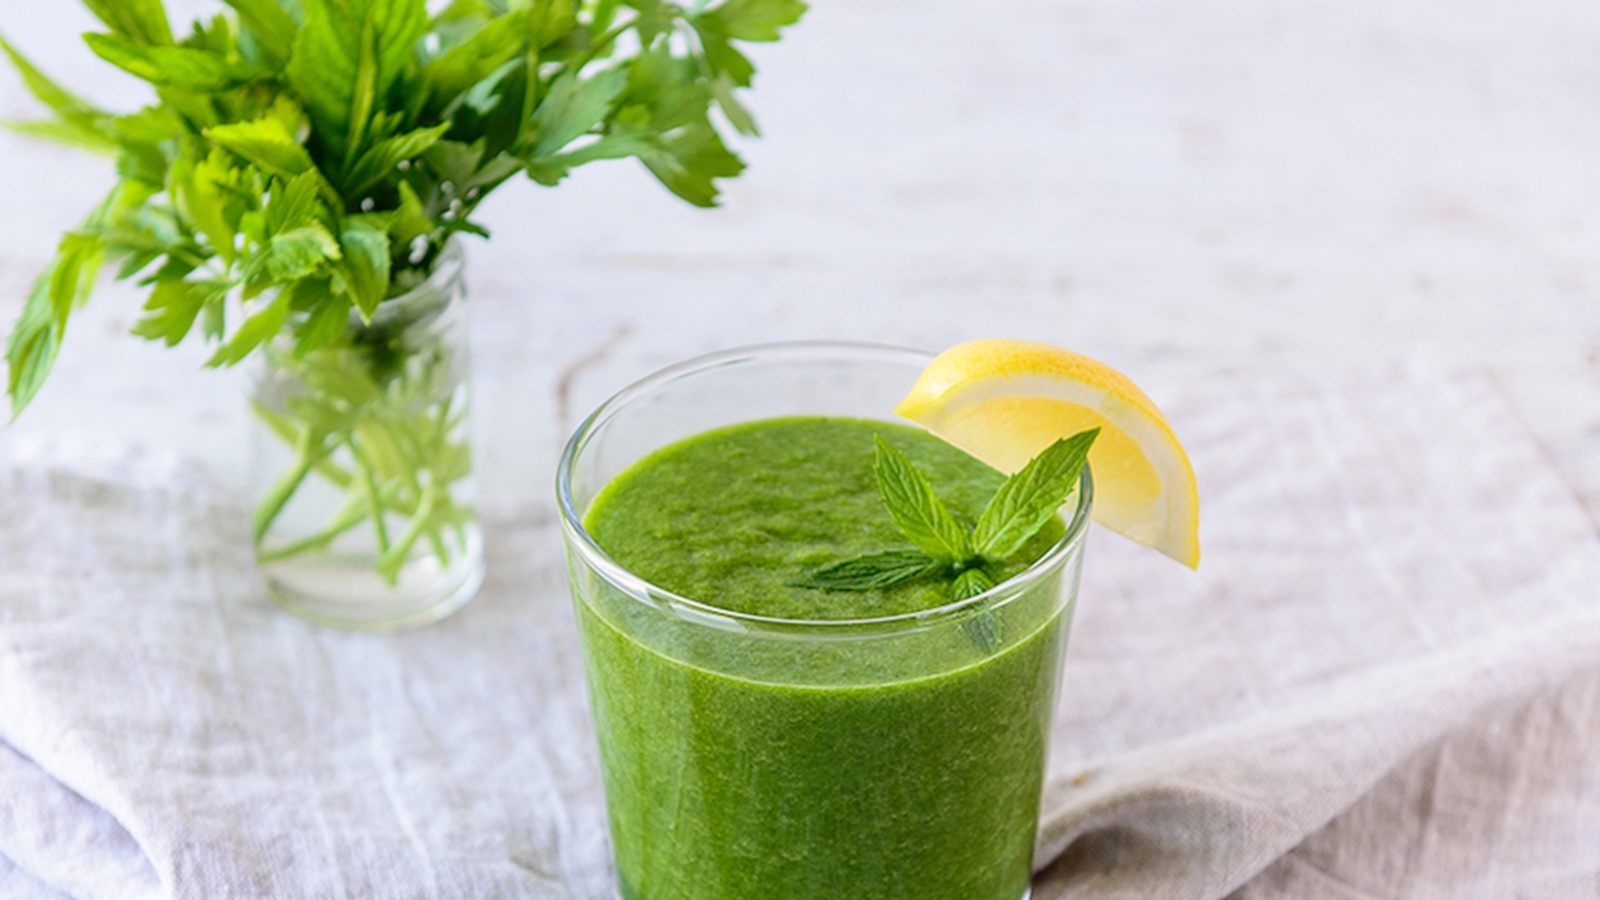 My Go-To Green Smoothie